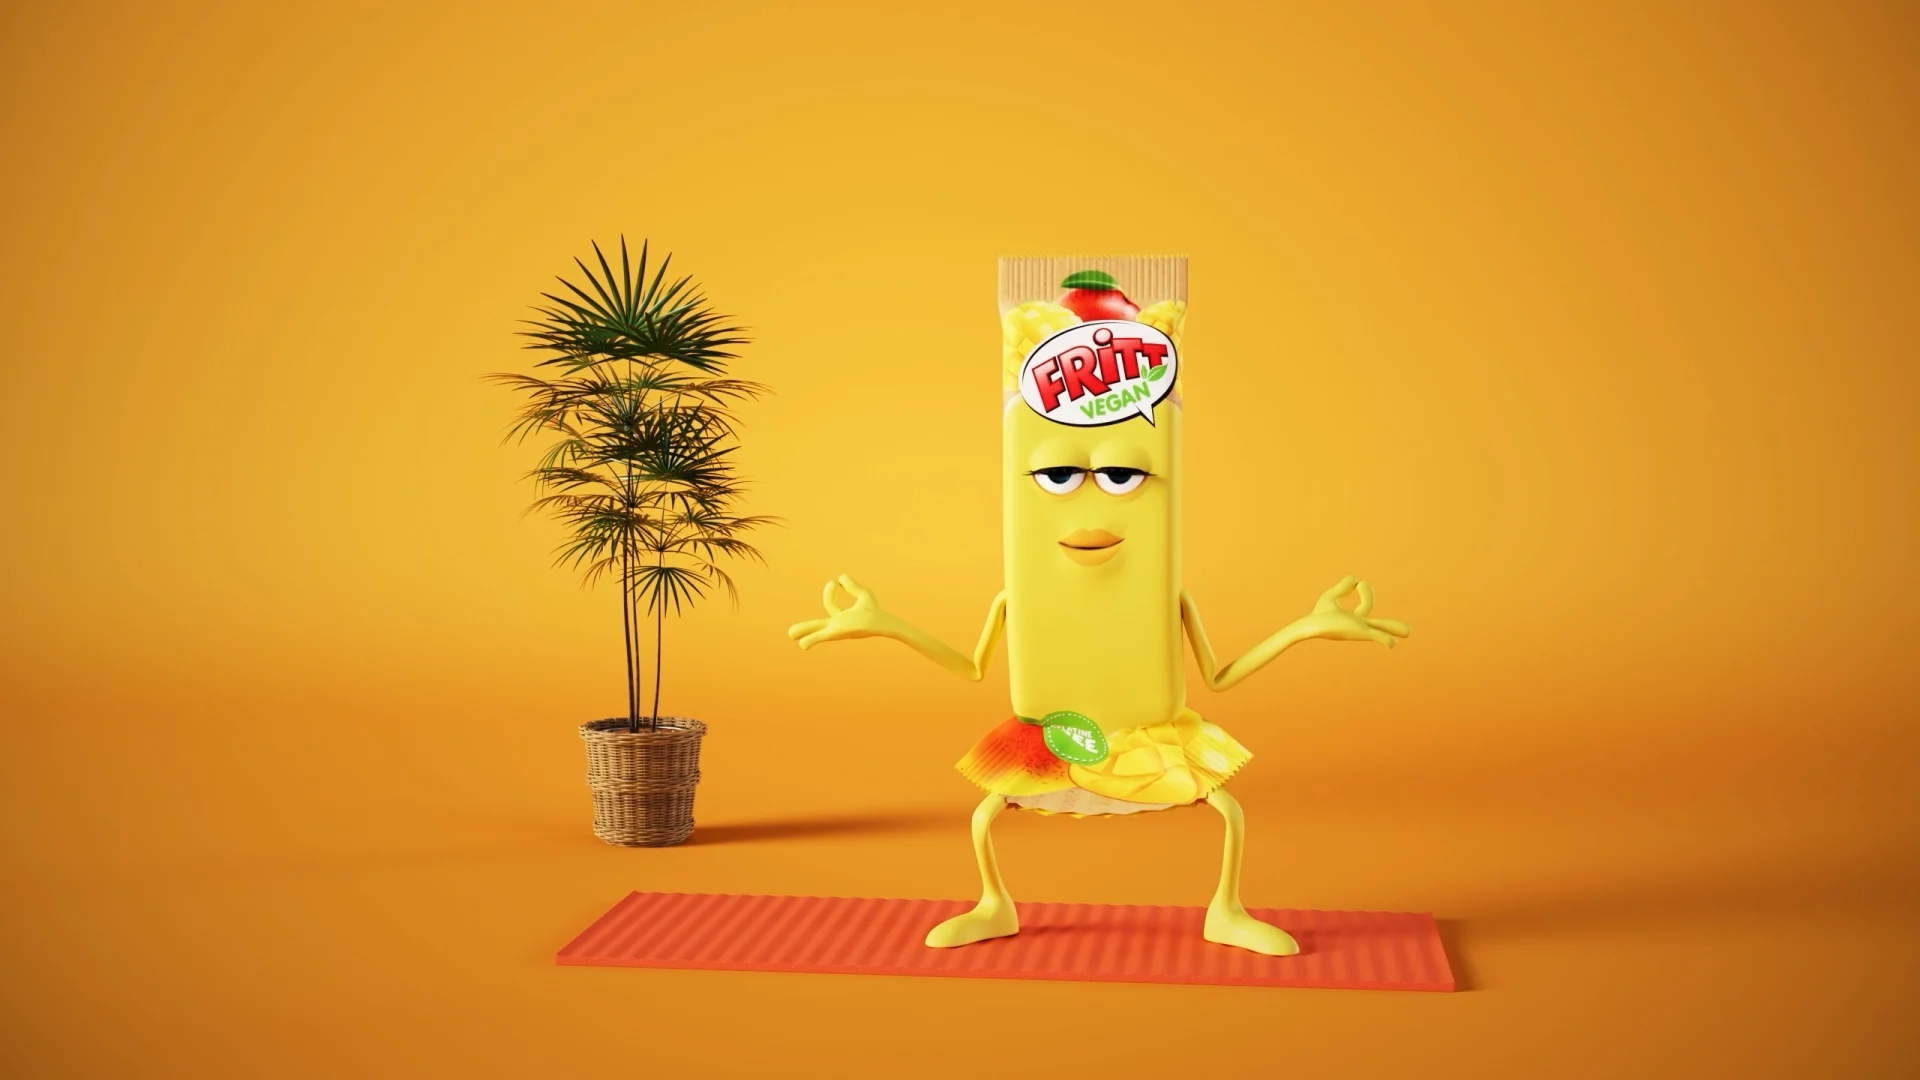 We see a Fritt Kauriegel doing a yoga pose in an orange room. In the background a plant and a yoga mat